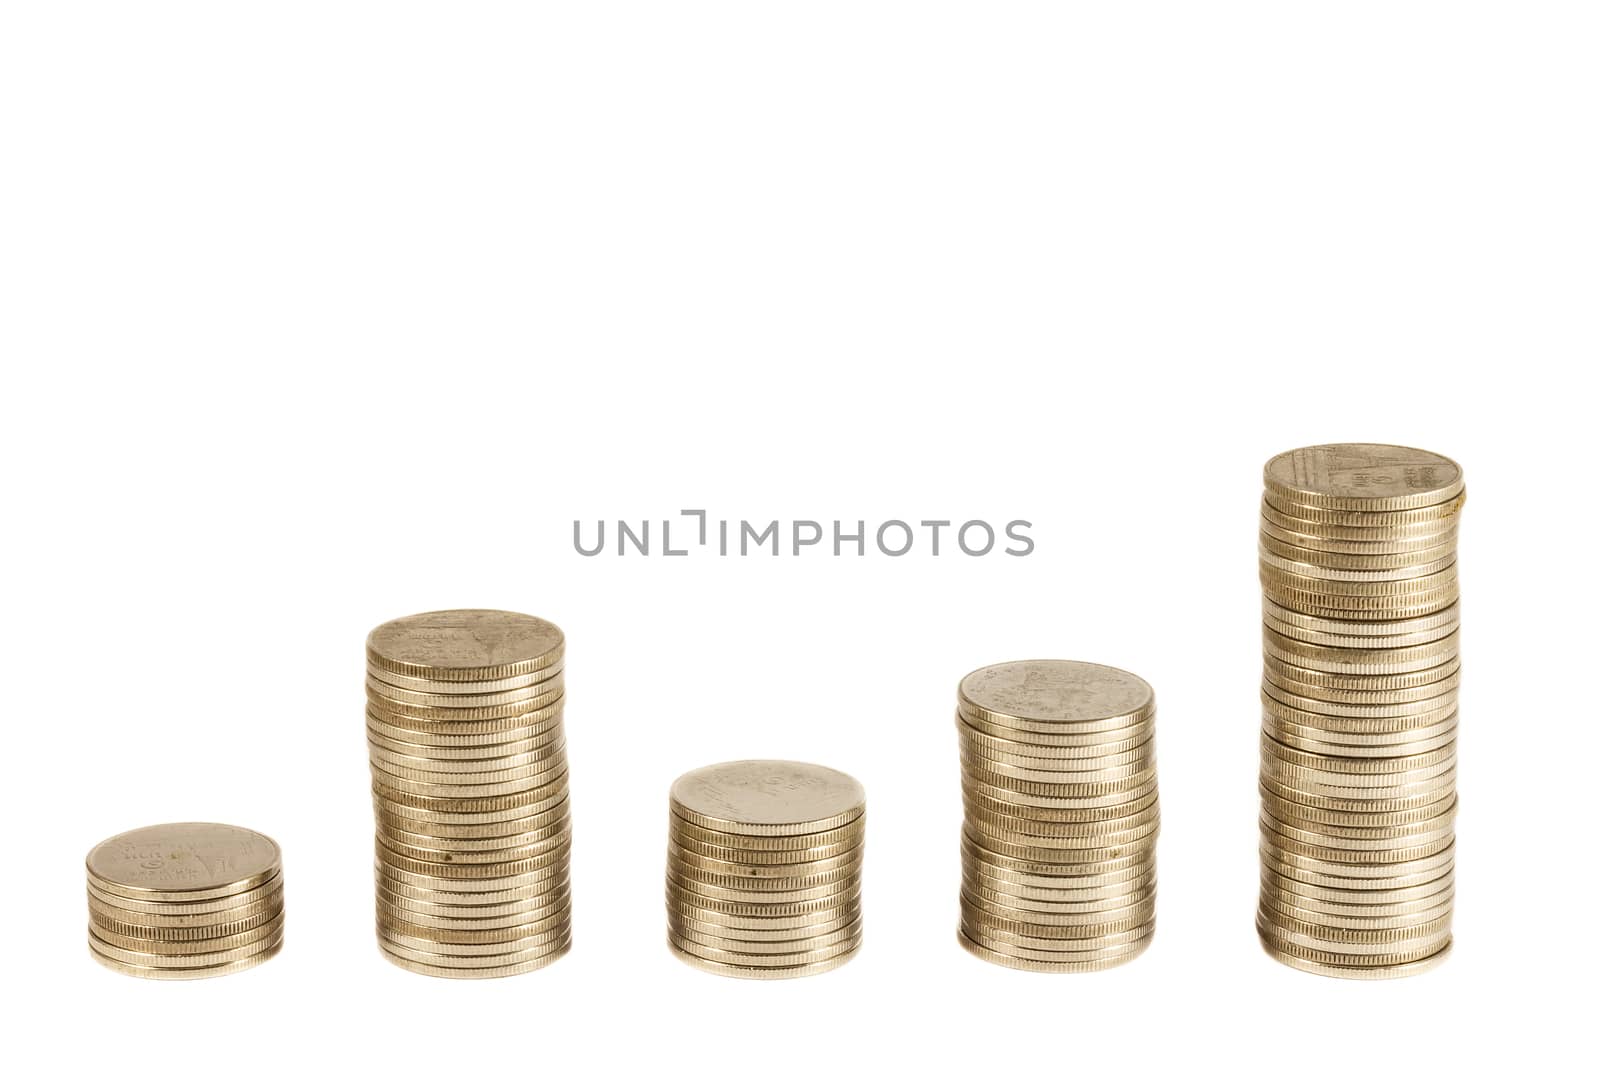 Thai coin stack on isolated background . financial concept .